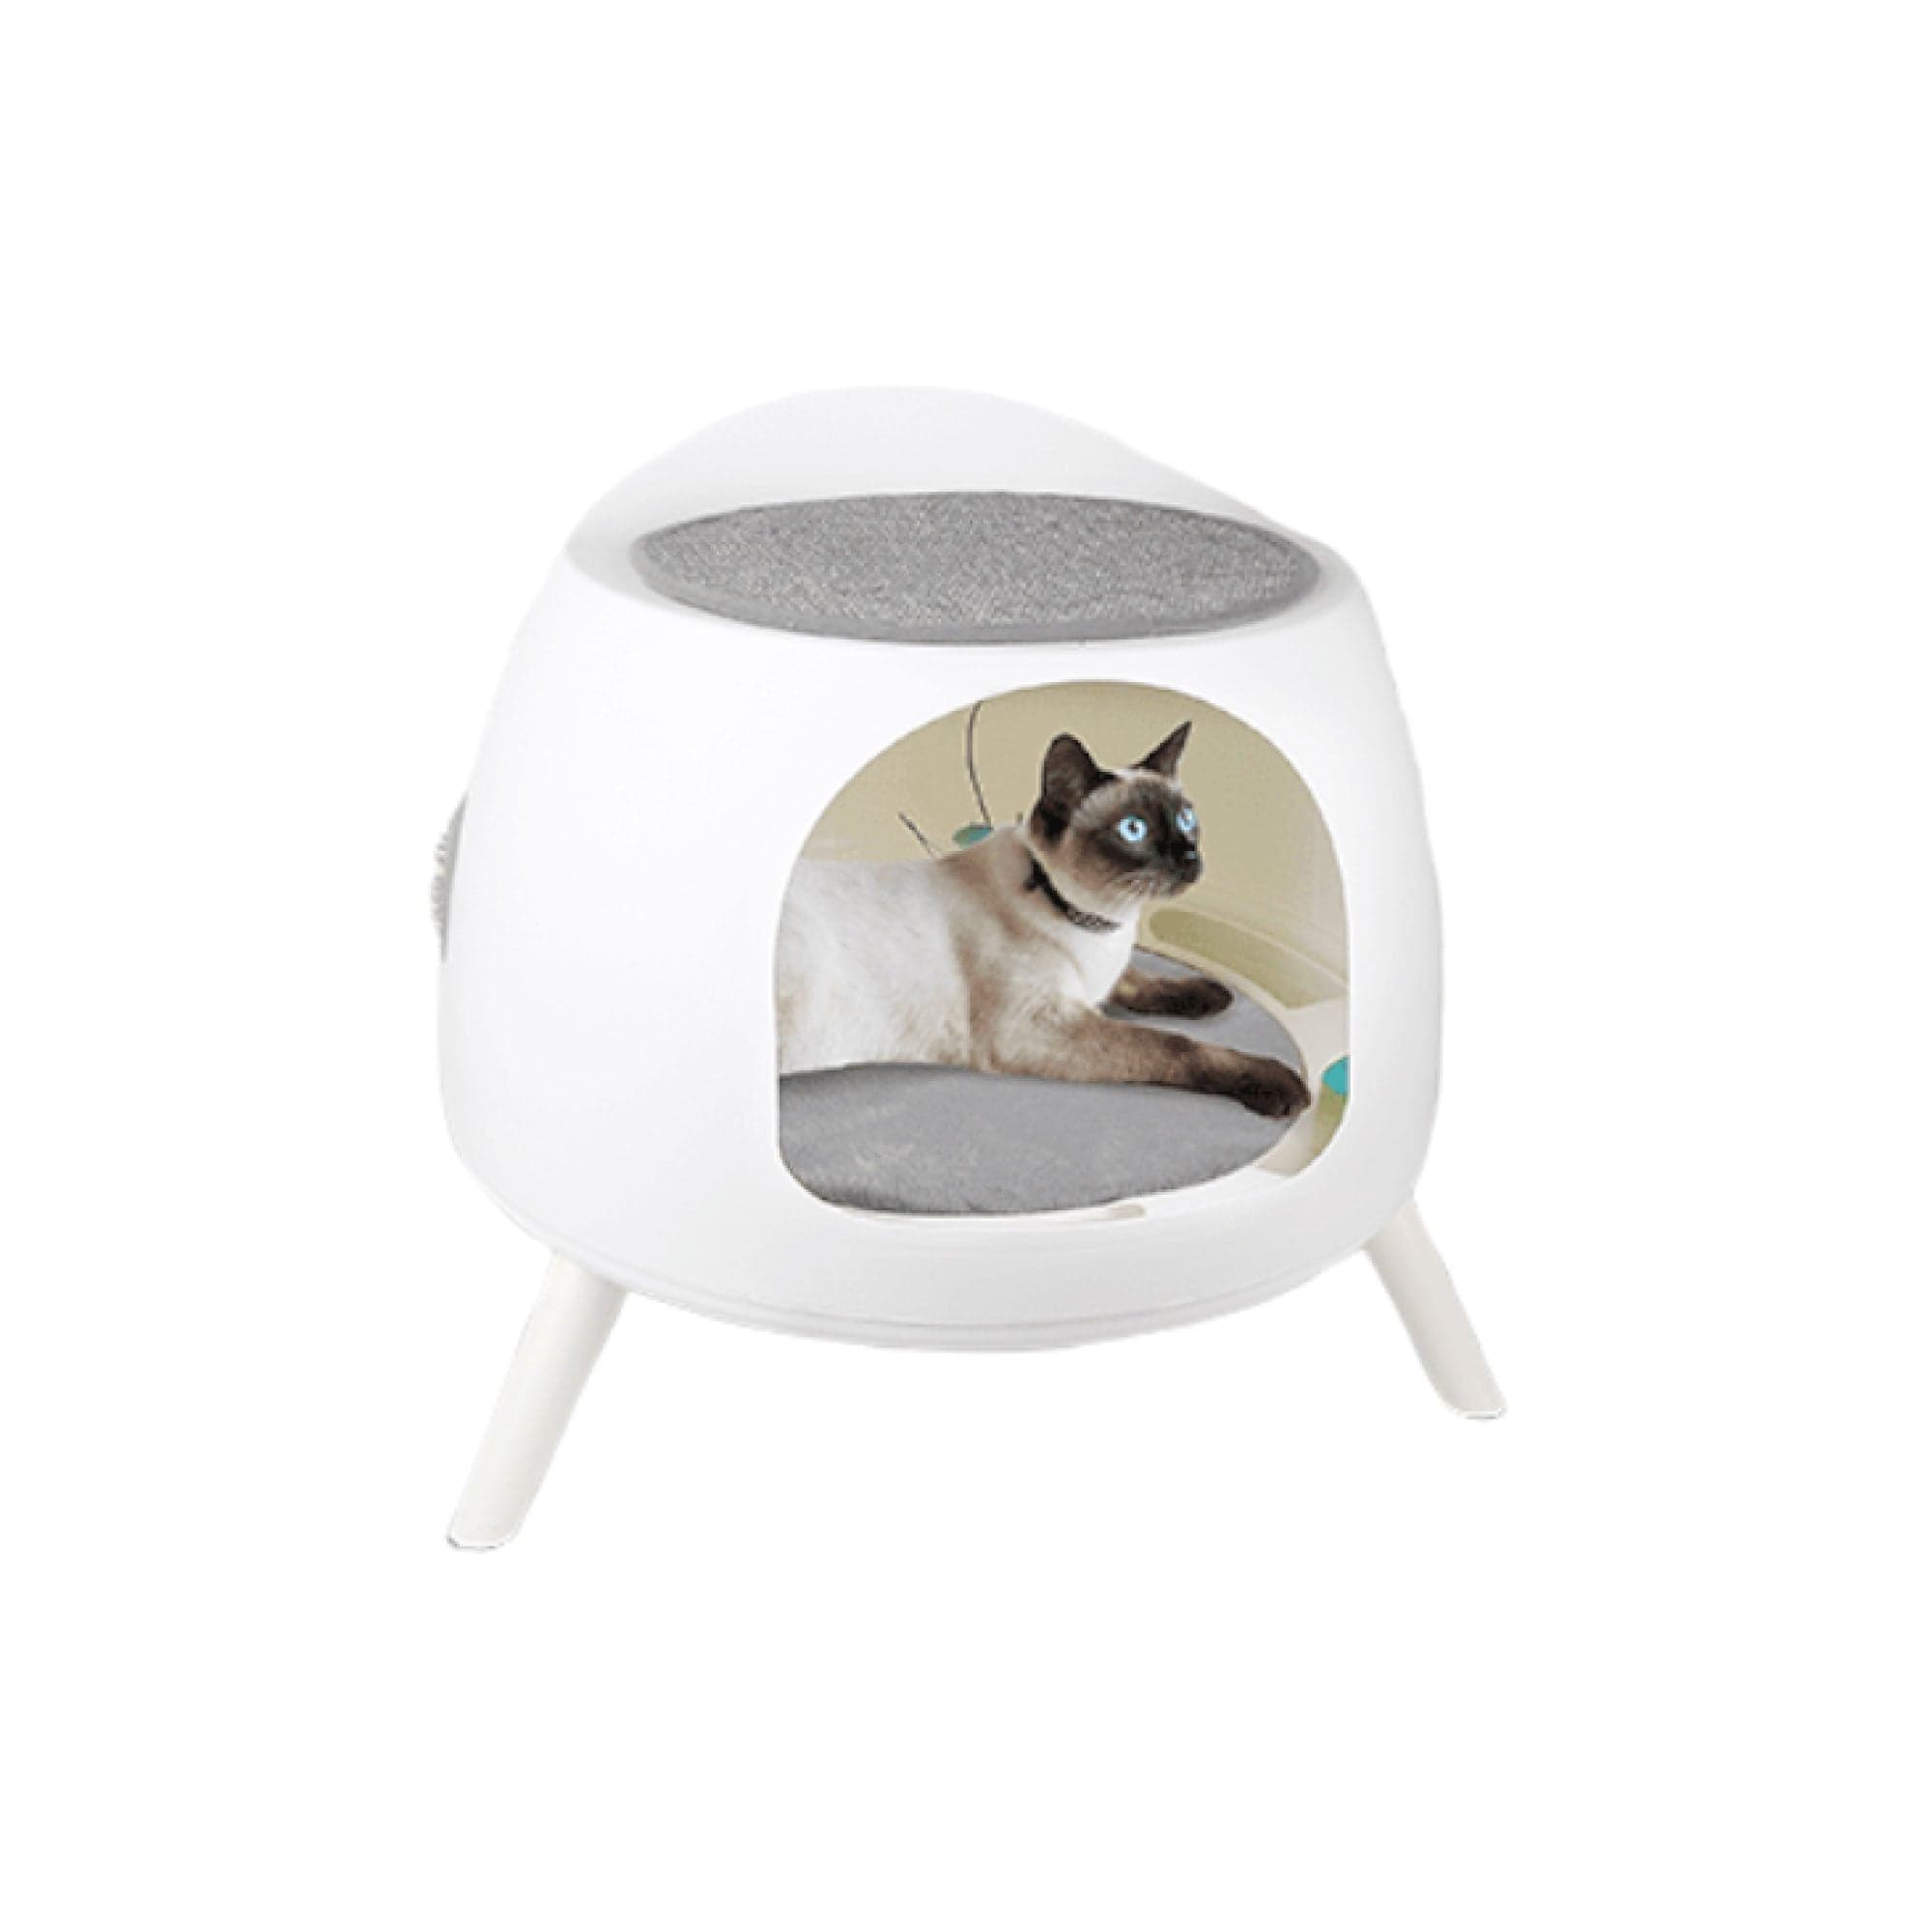 Cat Hideaway Play House with Scratcher, Grooming, and Catnip